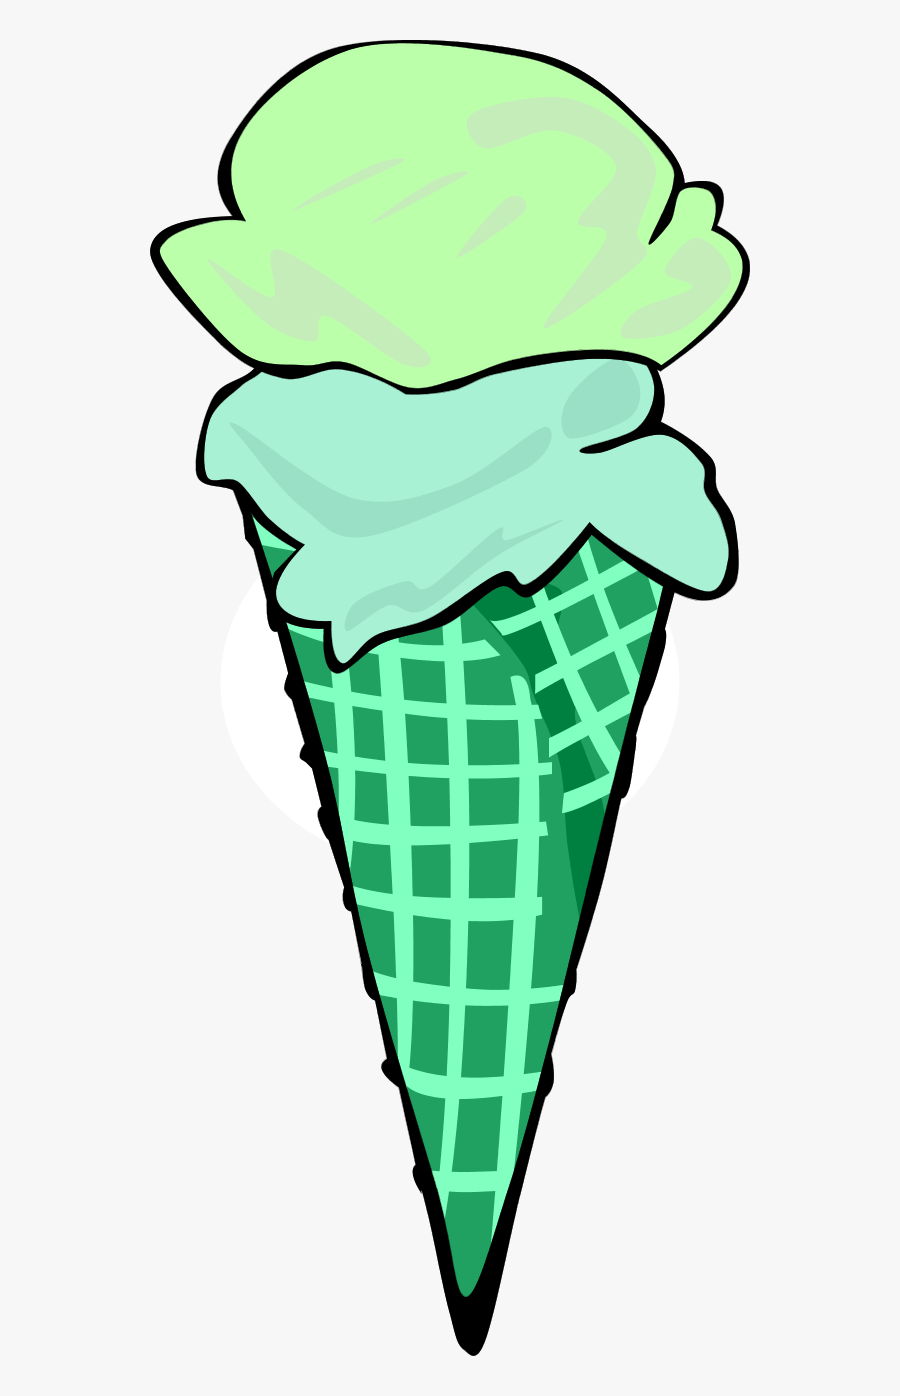 Ice Cream Cone Two Scoops For Fast Food Menu - Ice Cream Clipart Png, Transparent Clipart